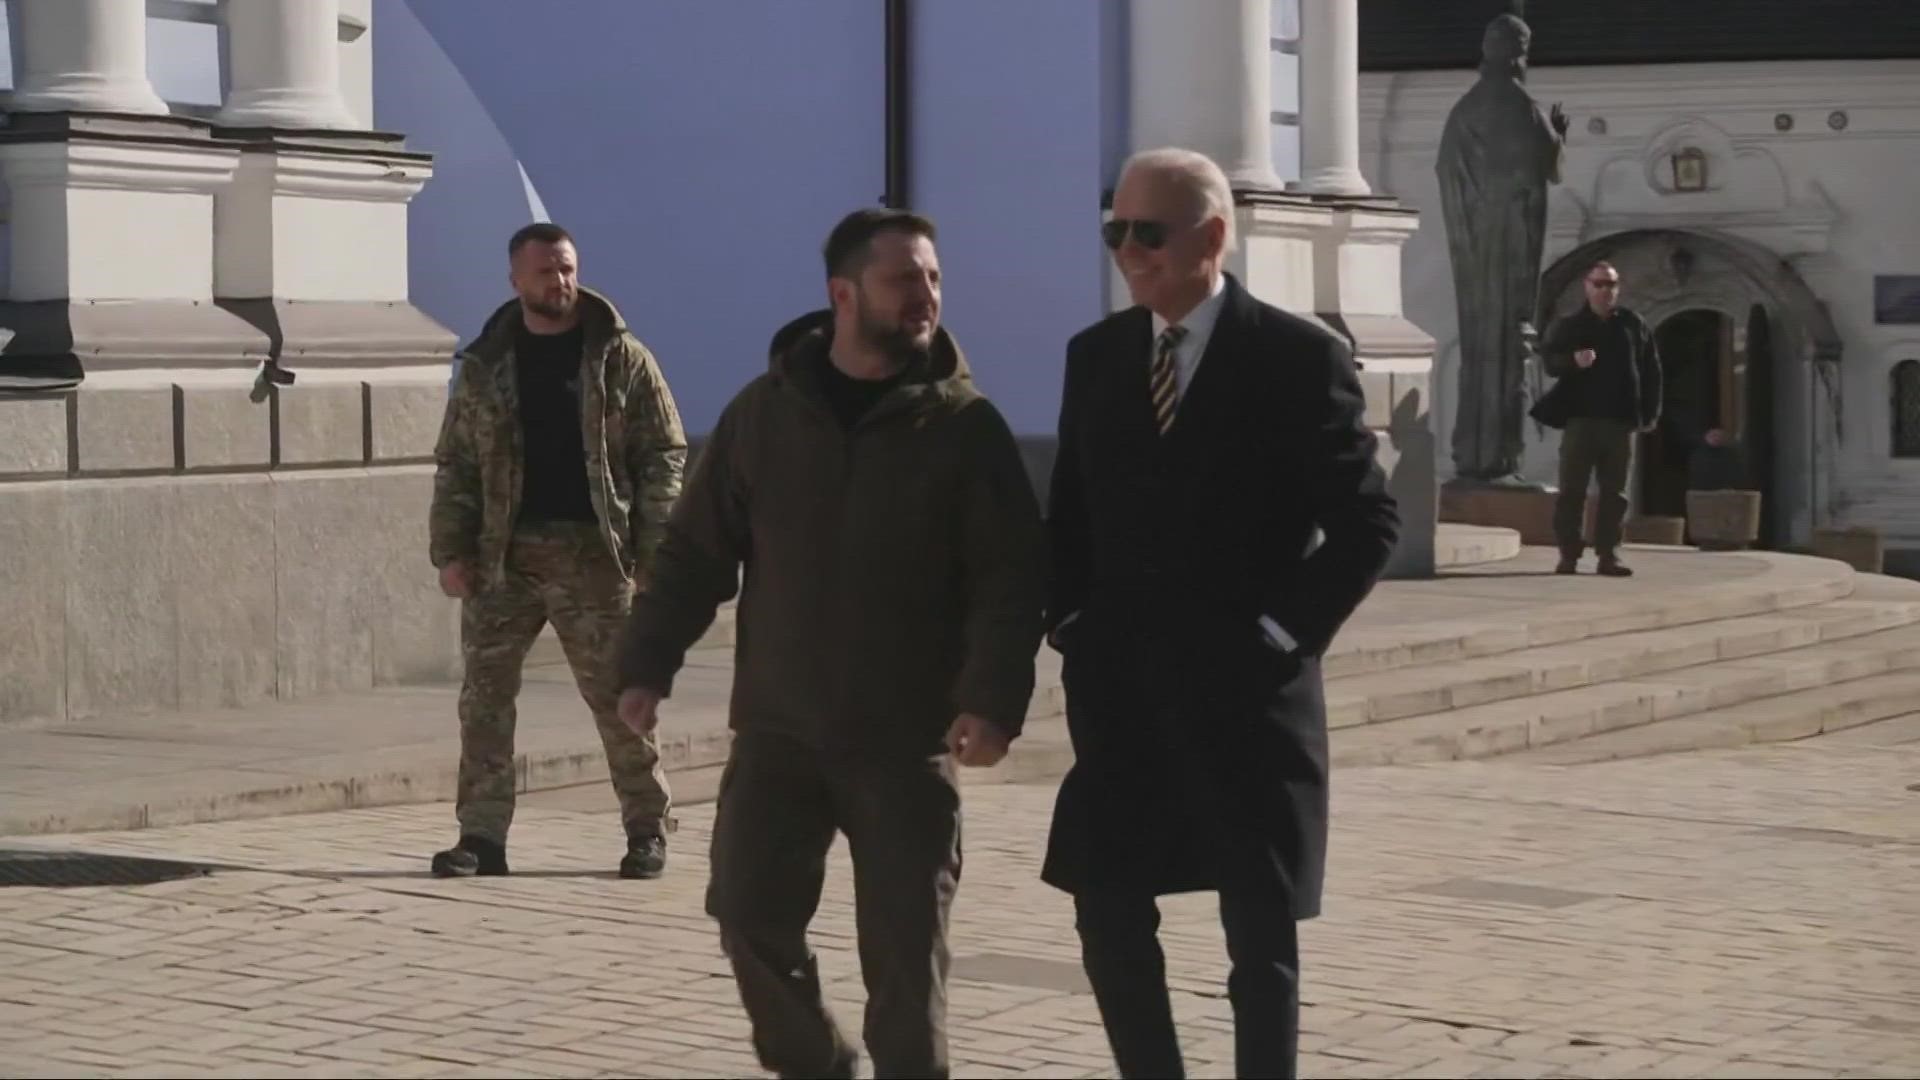 Biden’s mission in Kyiv was to underscore that the United States is prepared to stick with Ukraine “as long as it takes” to repel Russian forces.